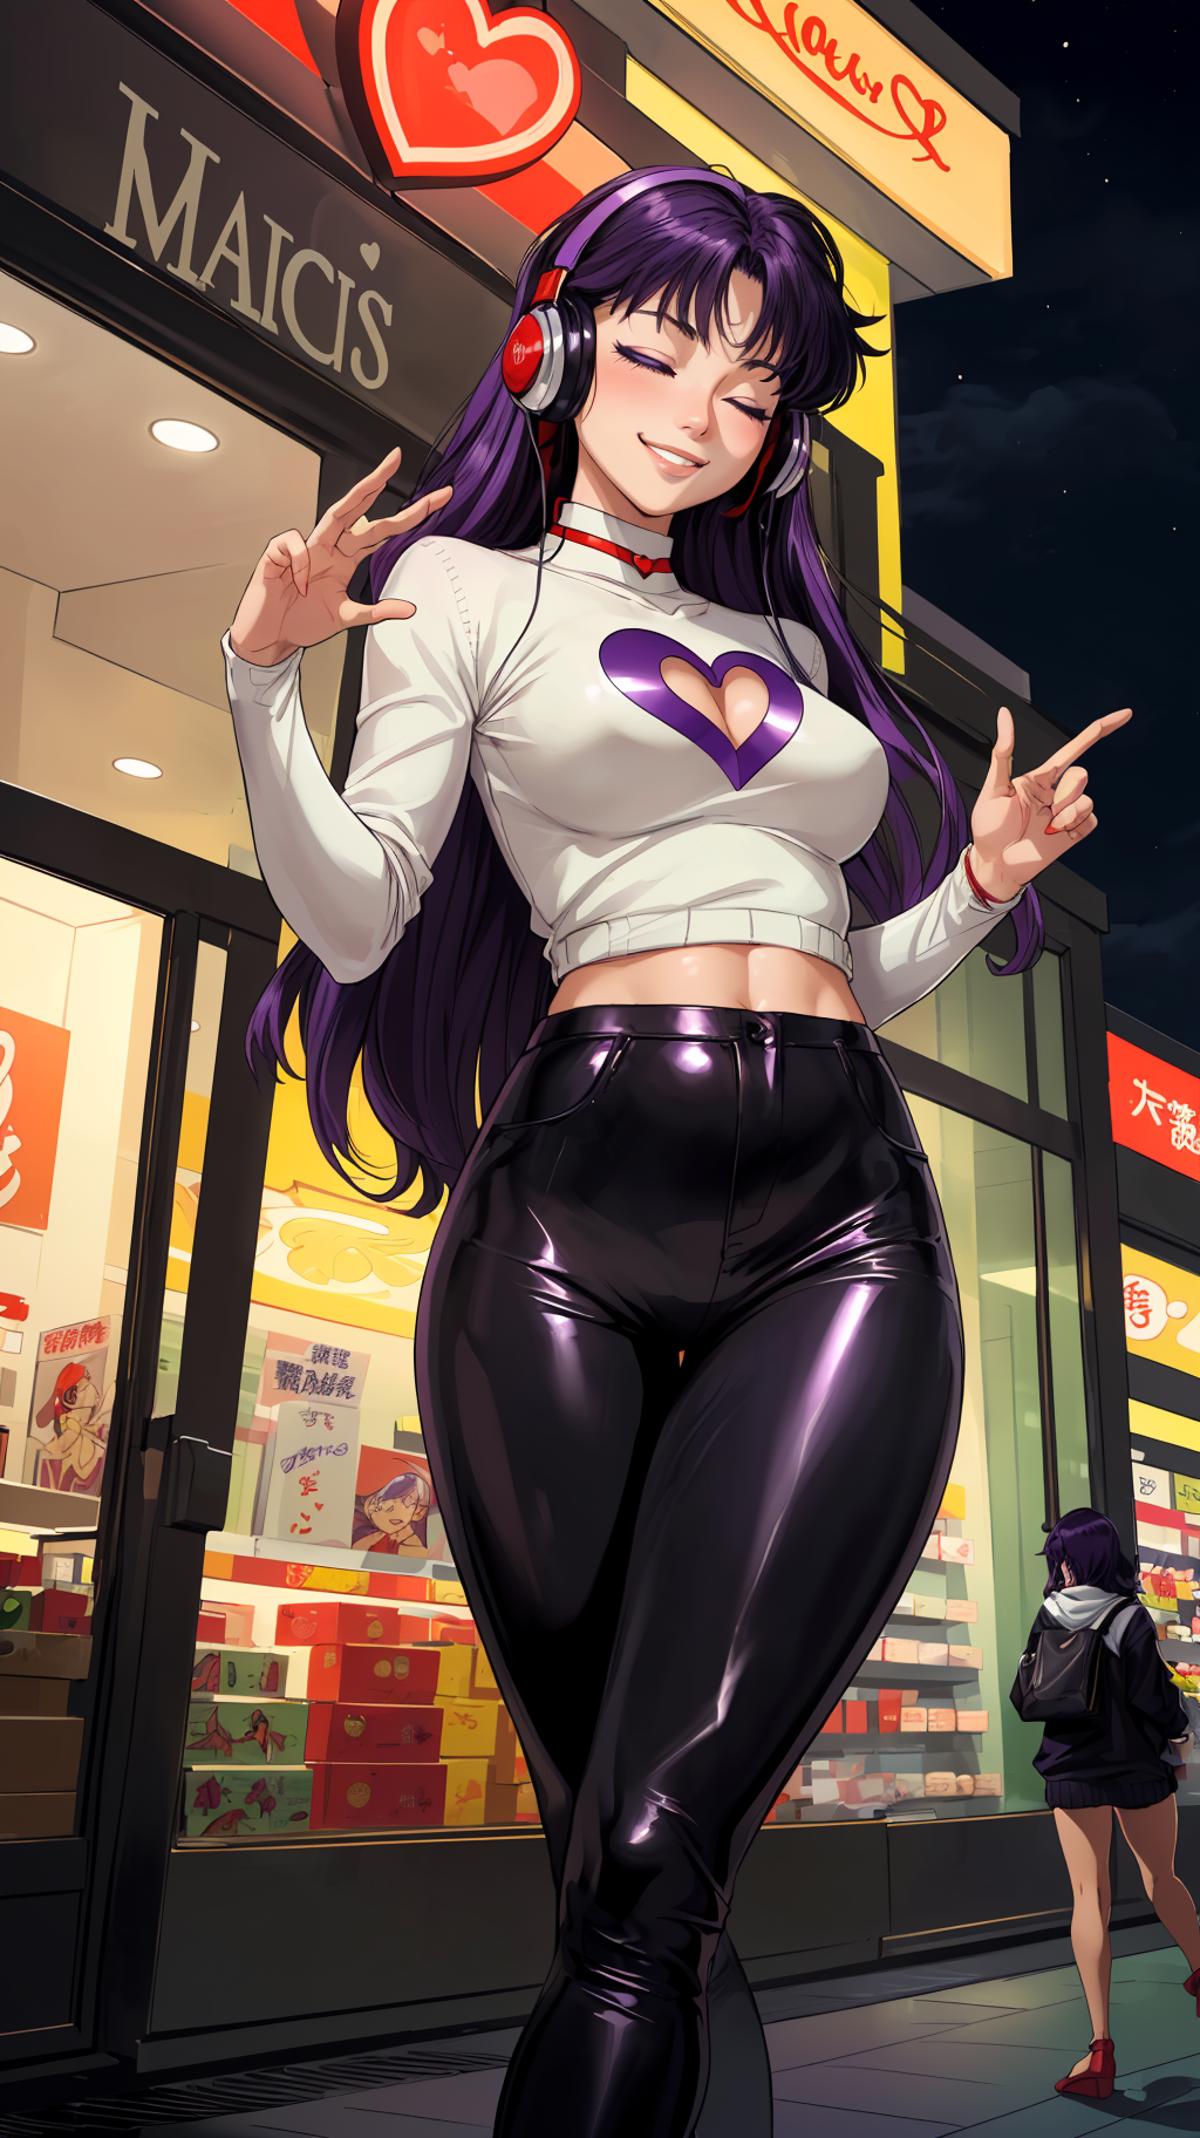 A cartoon image of a woman wearing a white t-shirt with a heart on it and black leather pants, giving a peace sign.